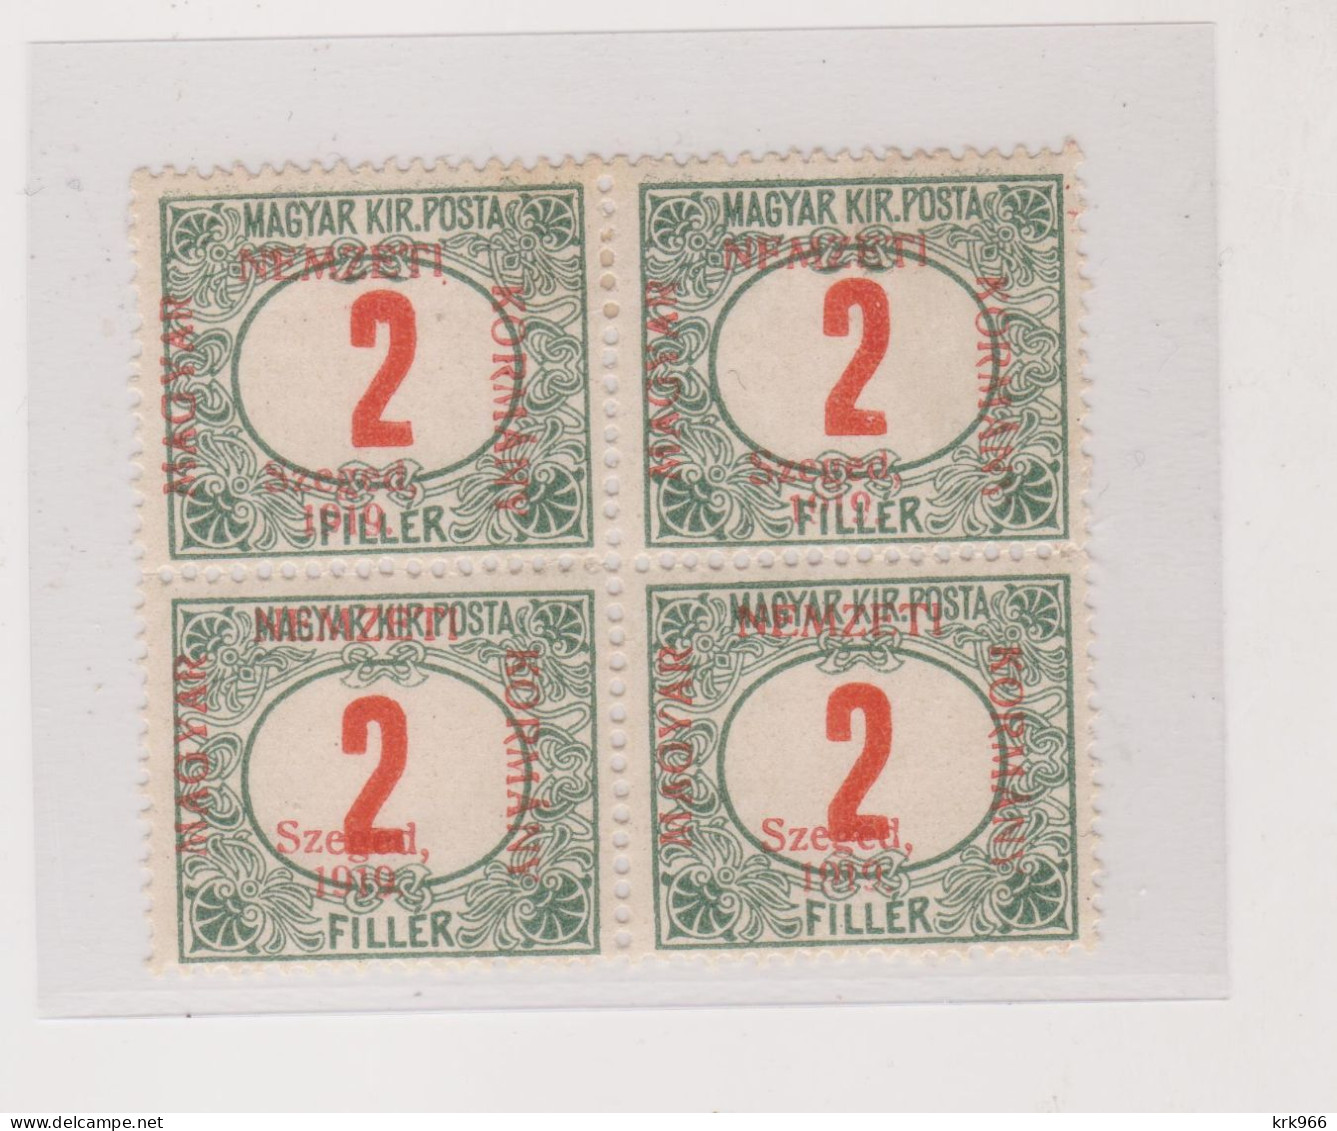 HUNGARY 1919 SZEGED SZEGEDIN Locals Postage Due  Mi 1 Bloc Of 4 Hinged/ MNH - Local Post Stamps